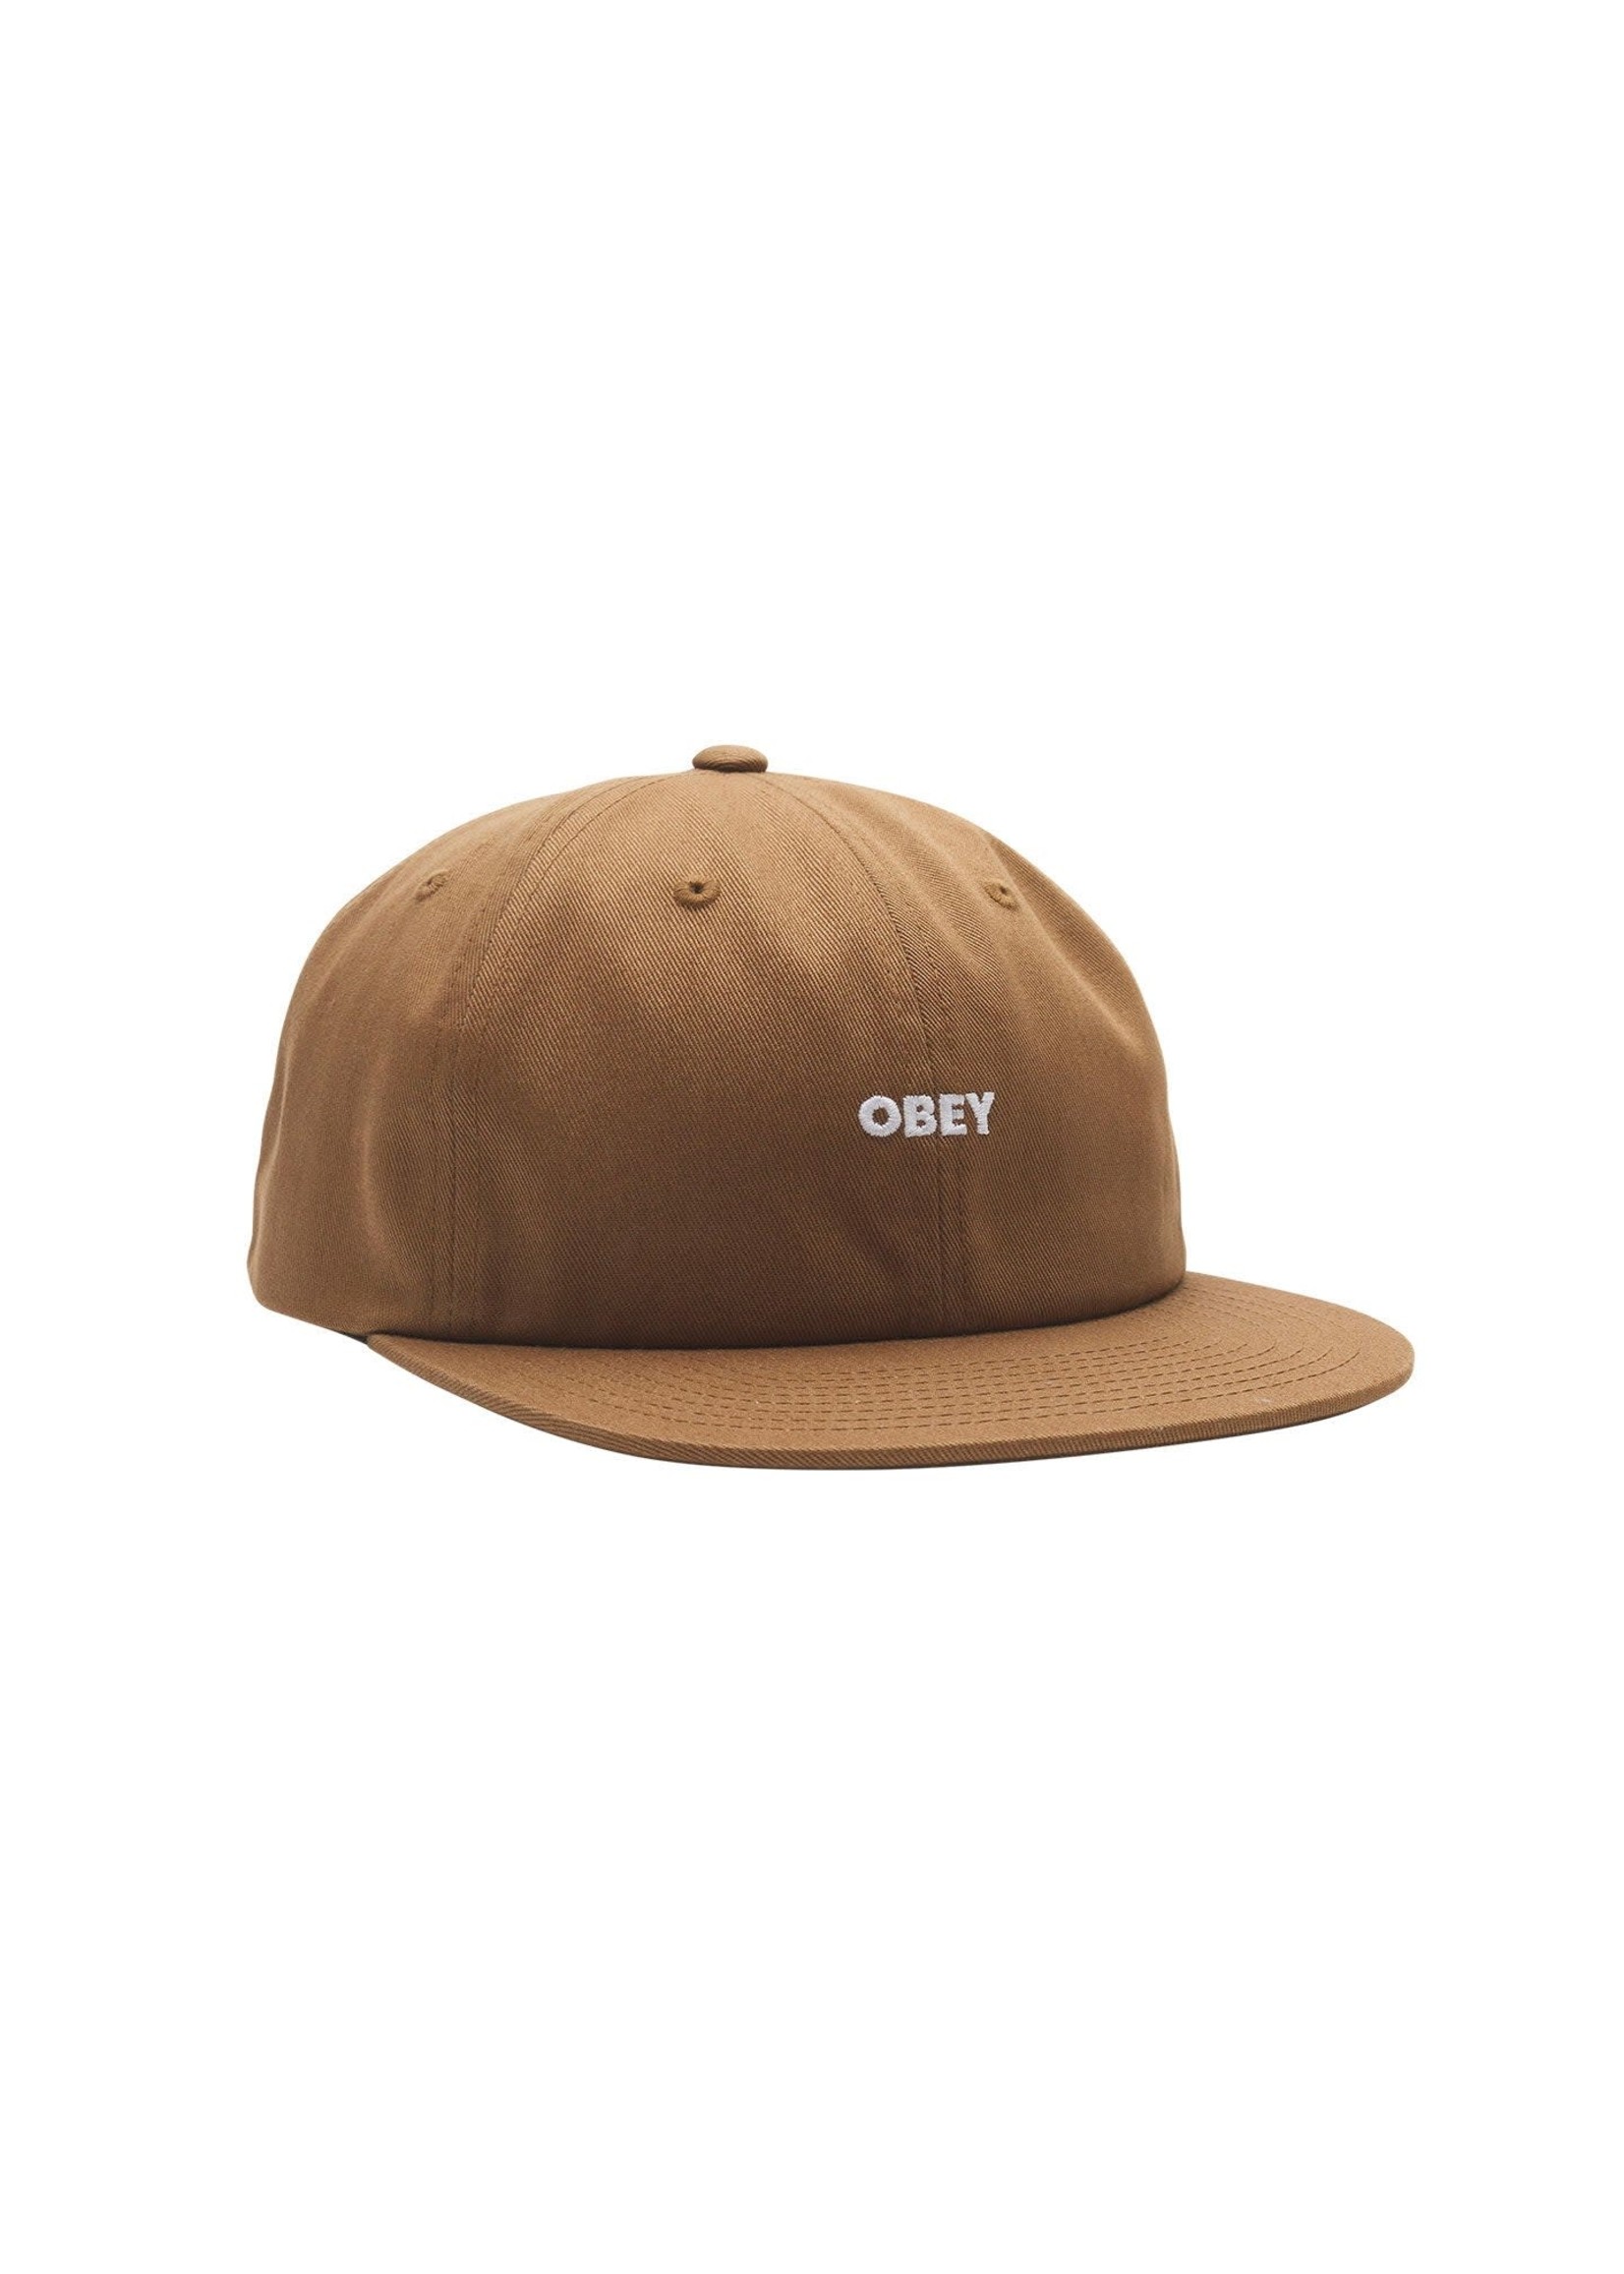 OBEY OBEY BOLD TWILL 6 PANEL BRS